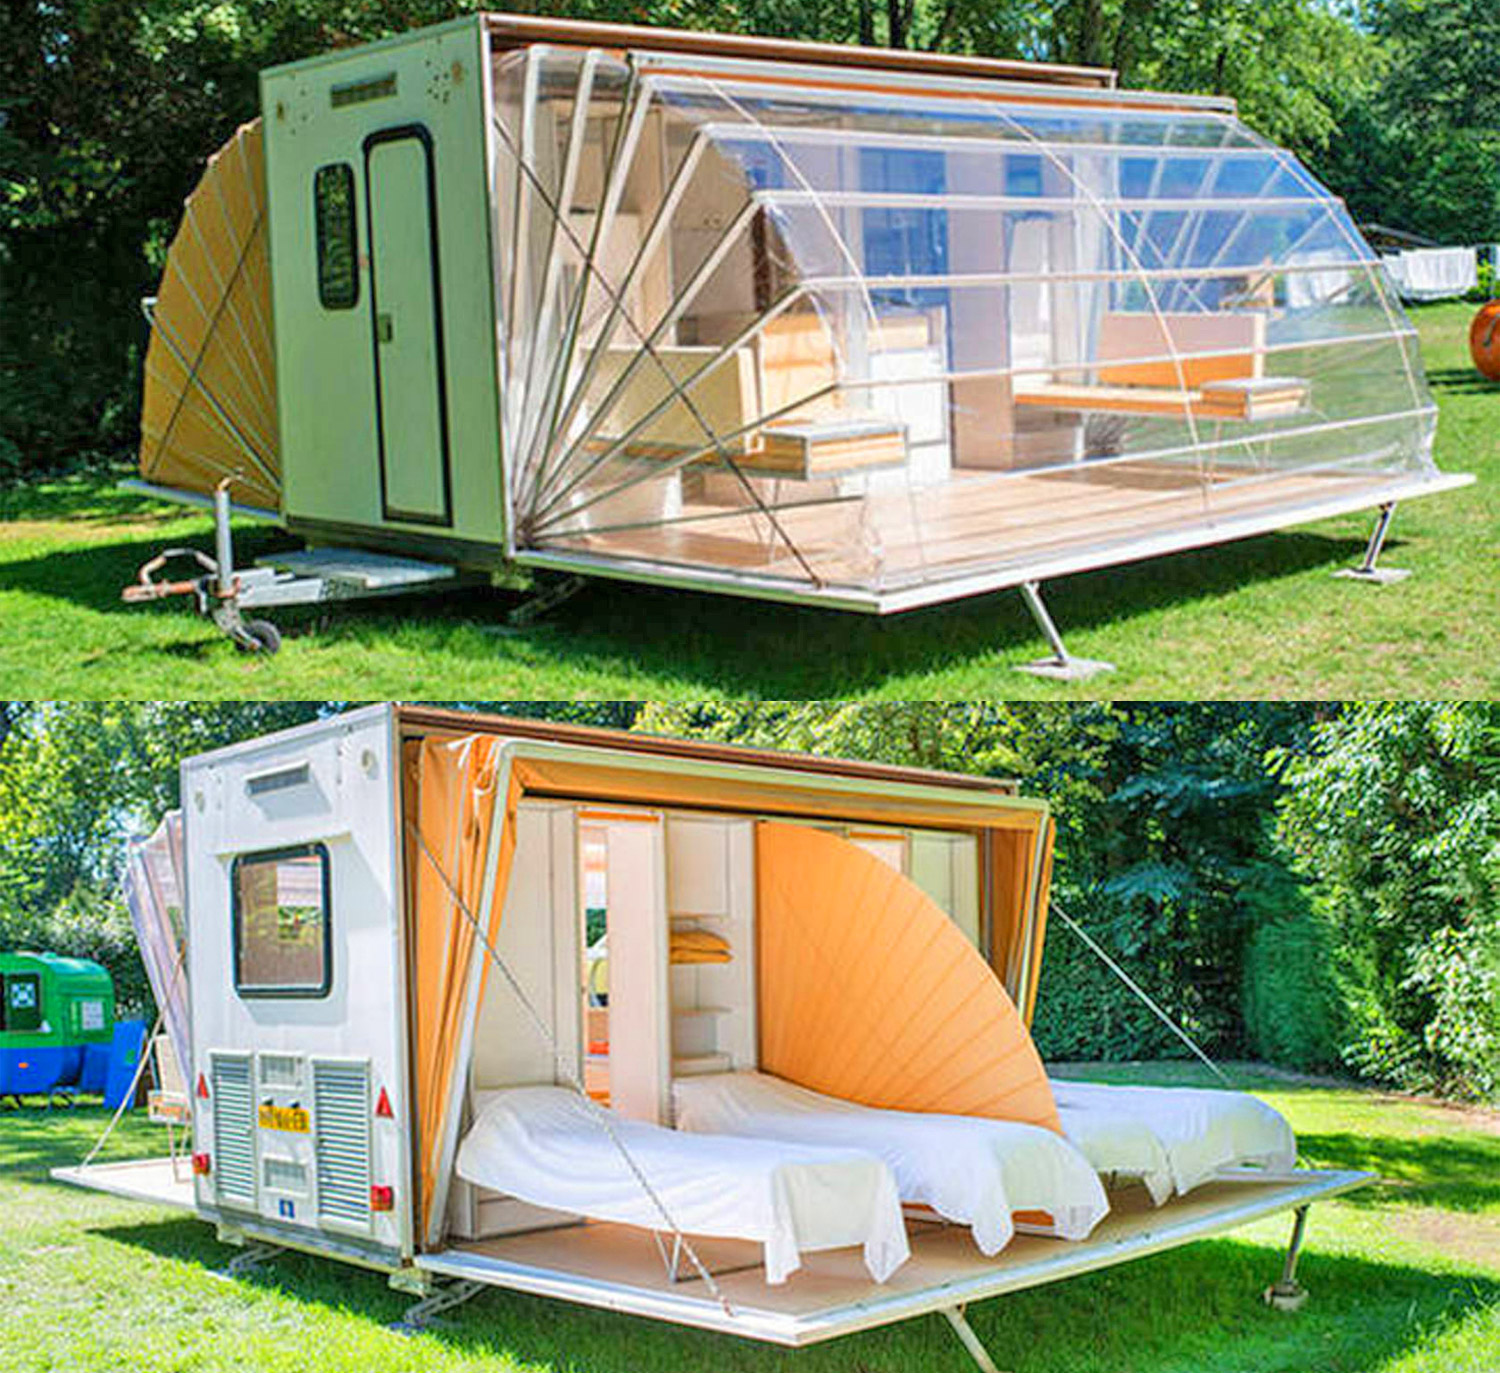 Incredible Folding Camping Trailer Expands To Triple Its Size 0 